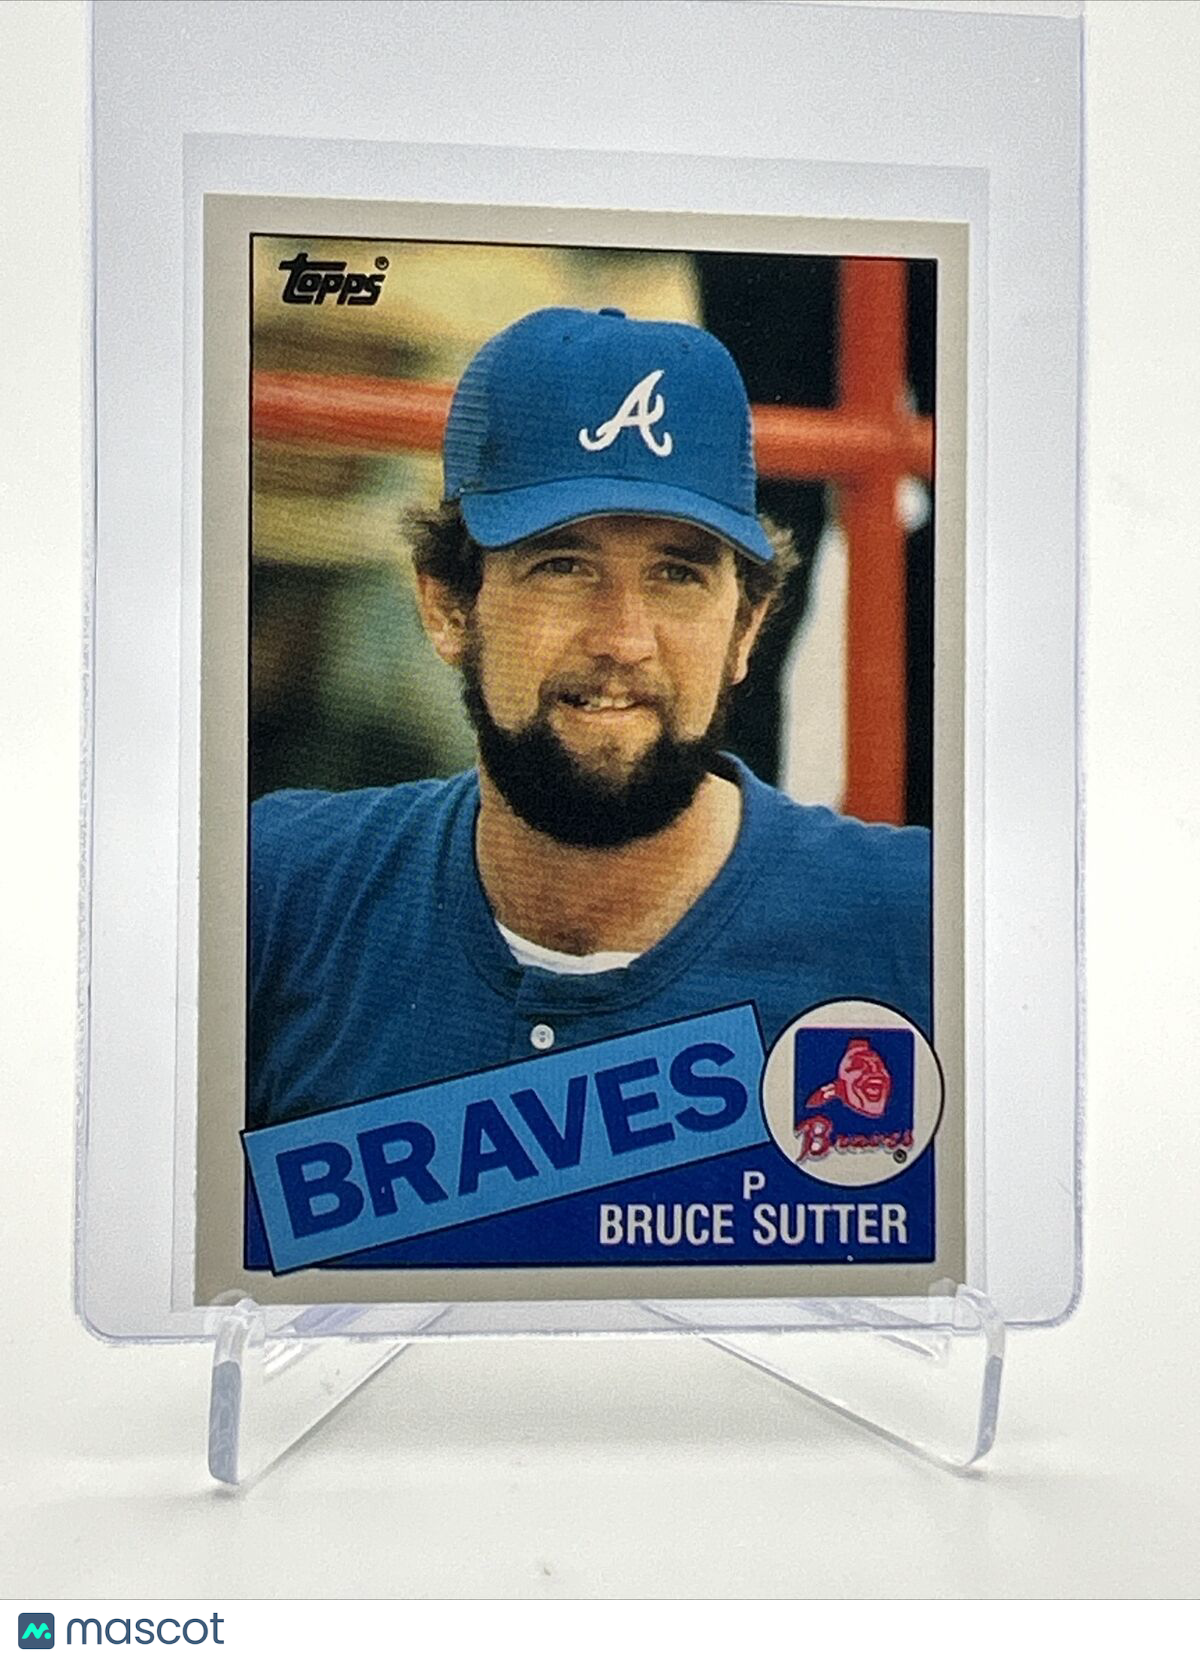 1985 Topps Traded Bruce Sutter Baseball Card #115T NM-MT FREE SHIPPING